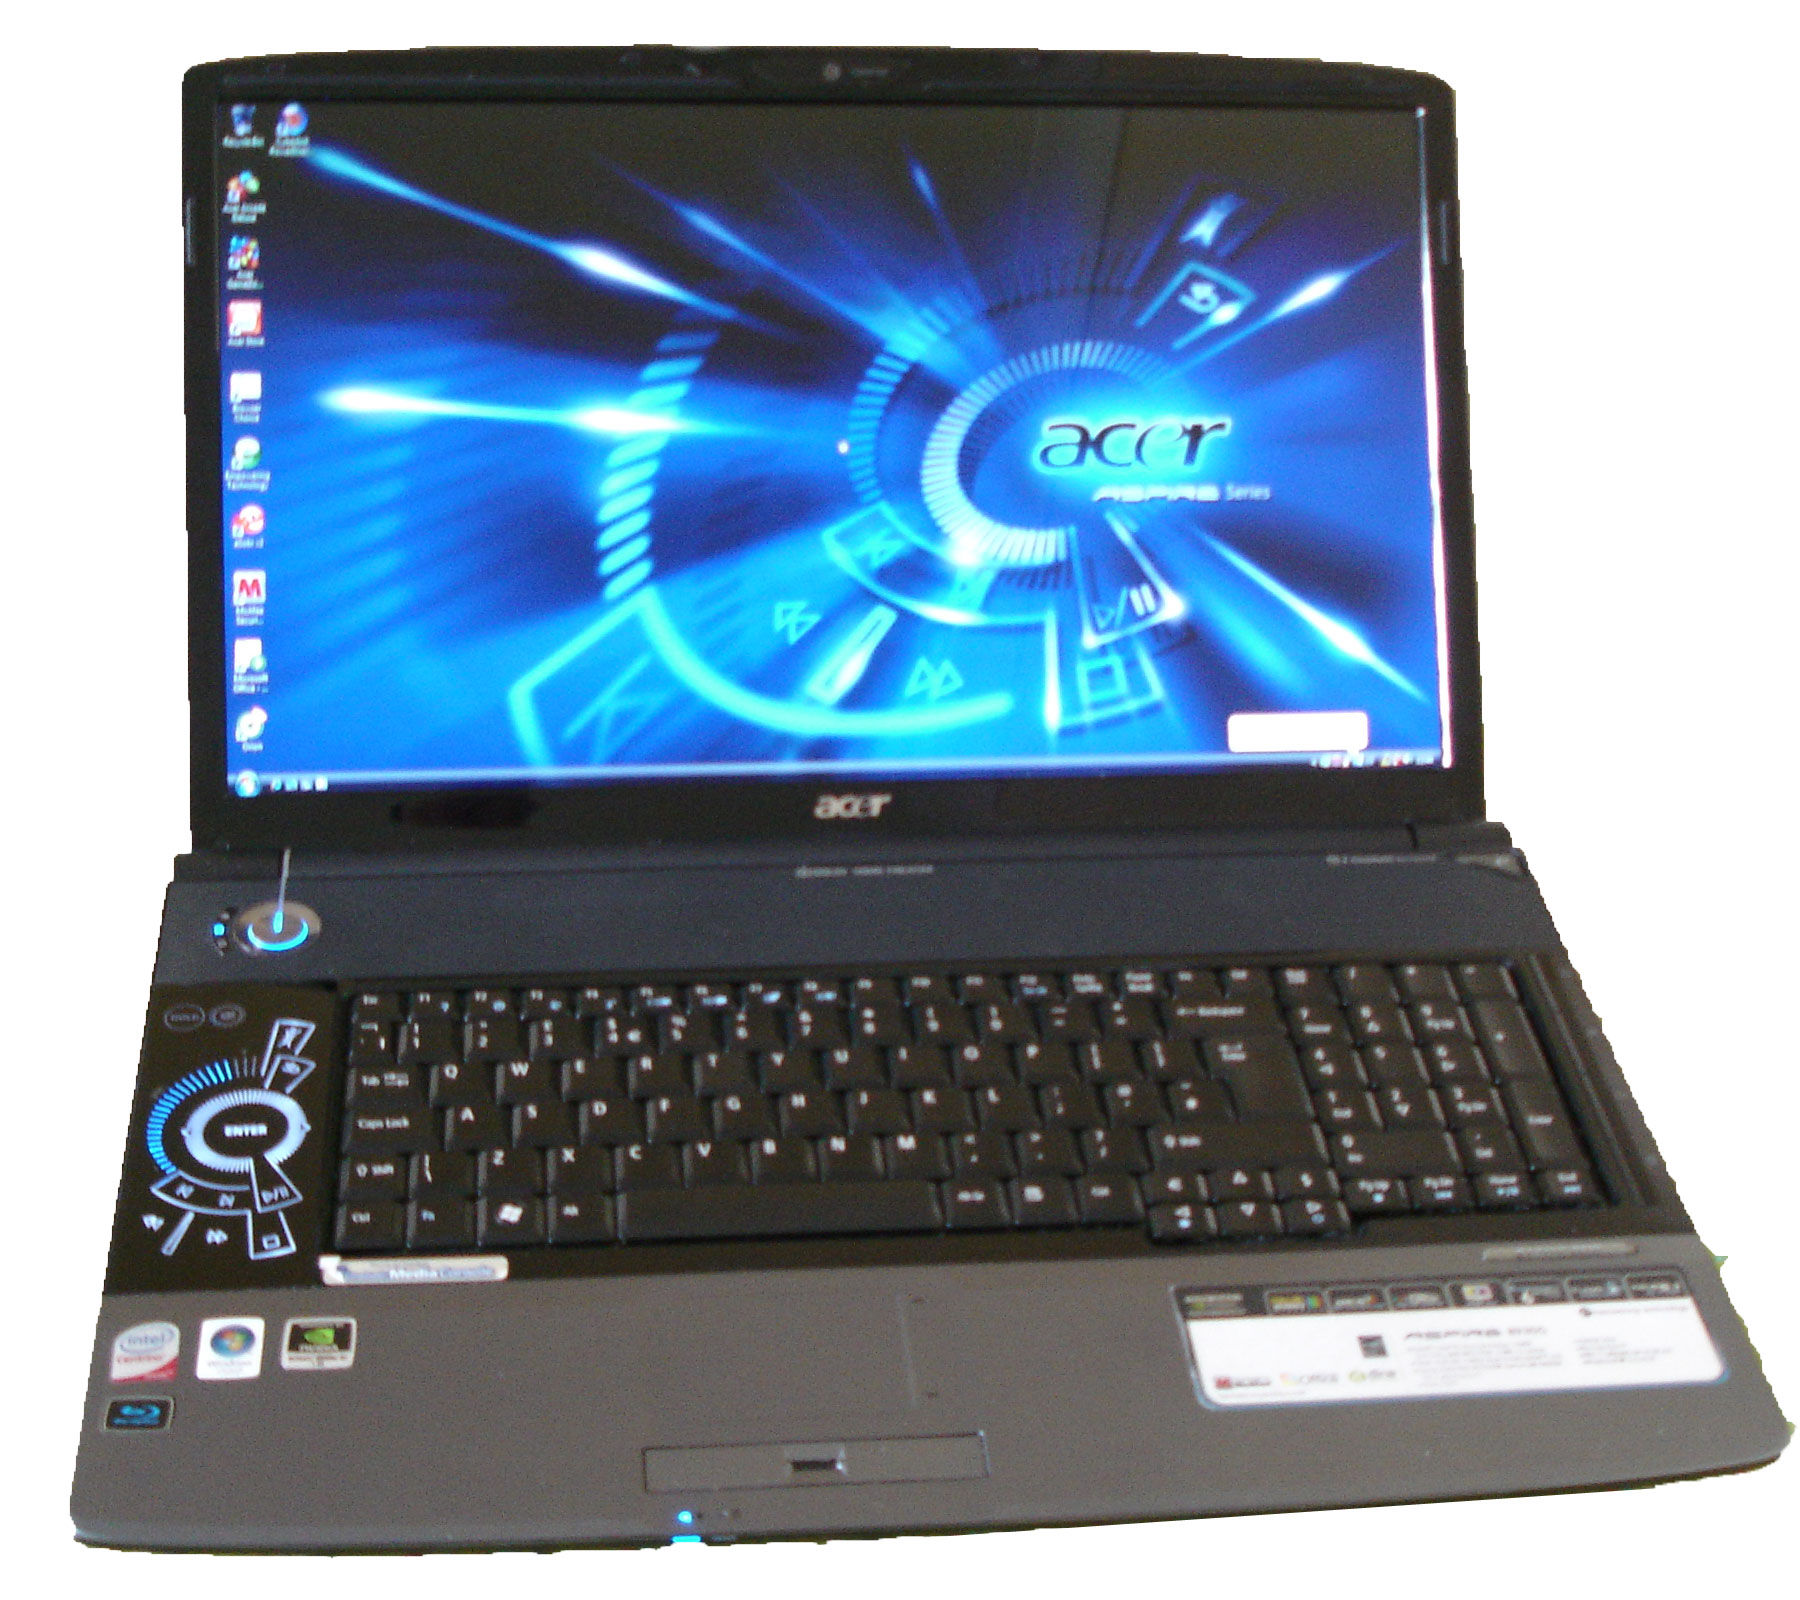 Free Download Setup Is Starting Services Windows 7 Acer Programs